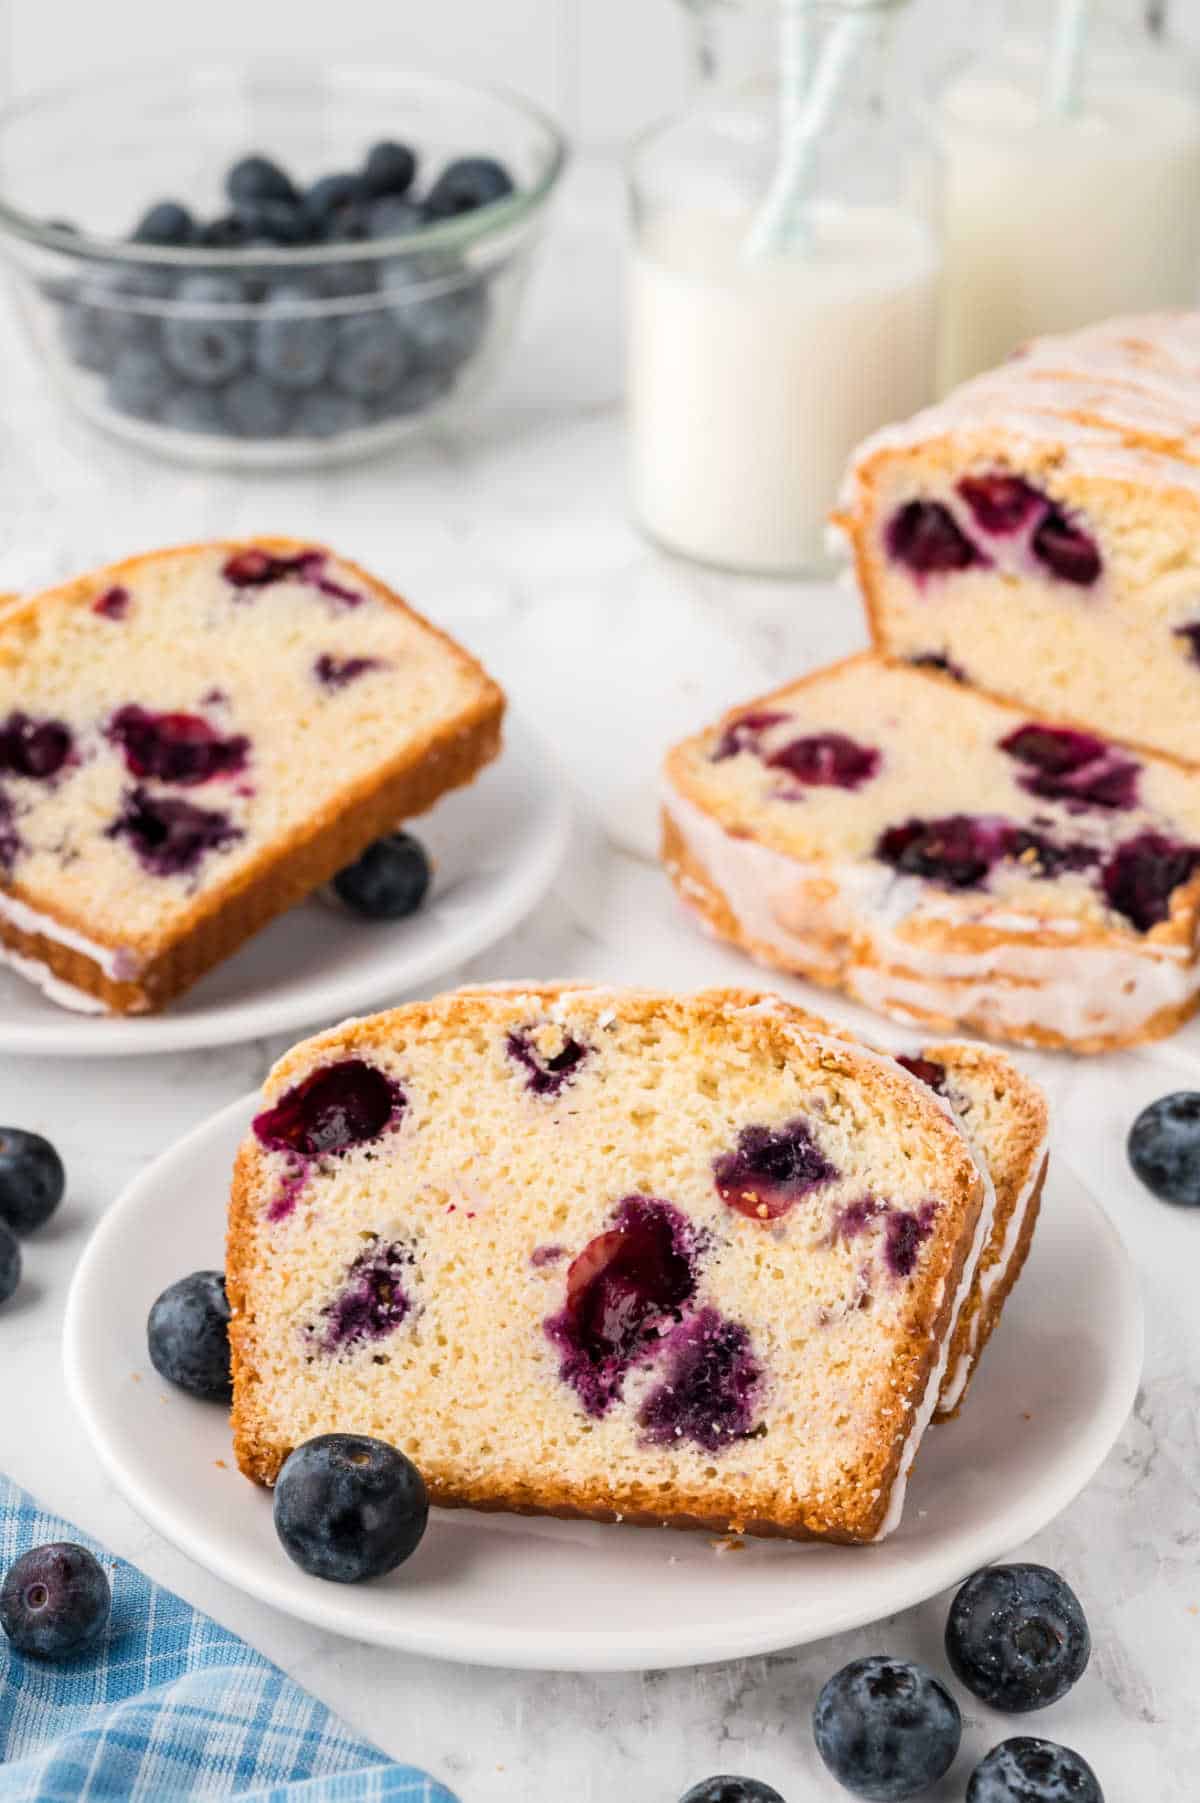 Slices of blueberry bread on a plate.